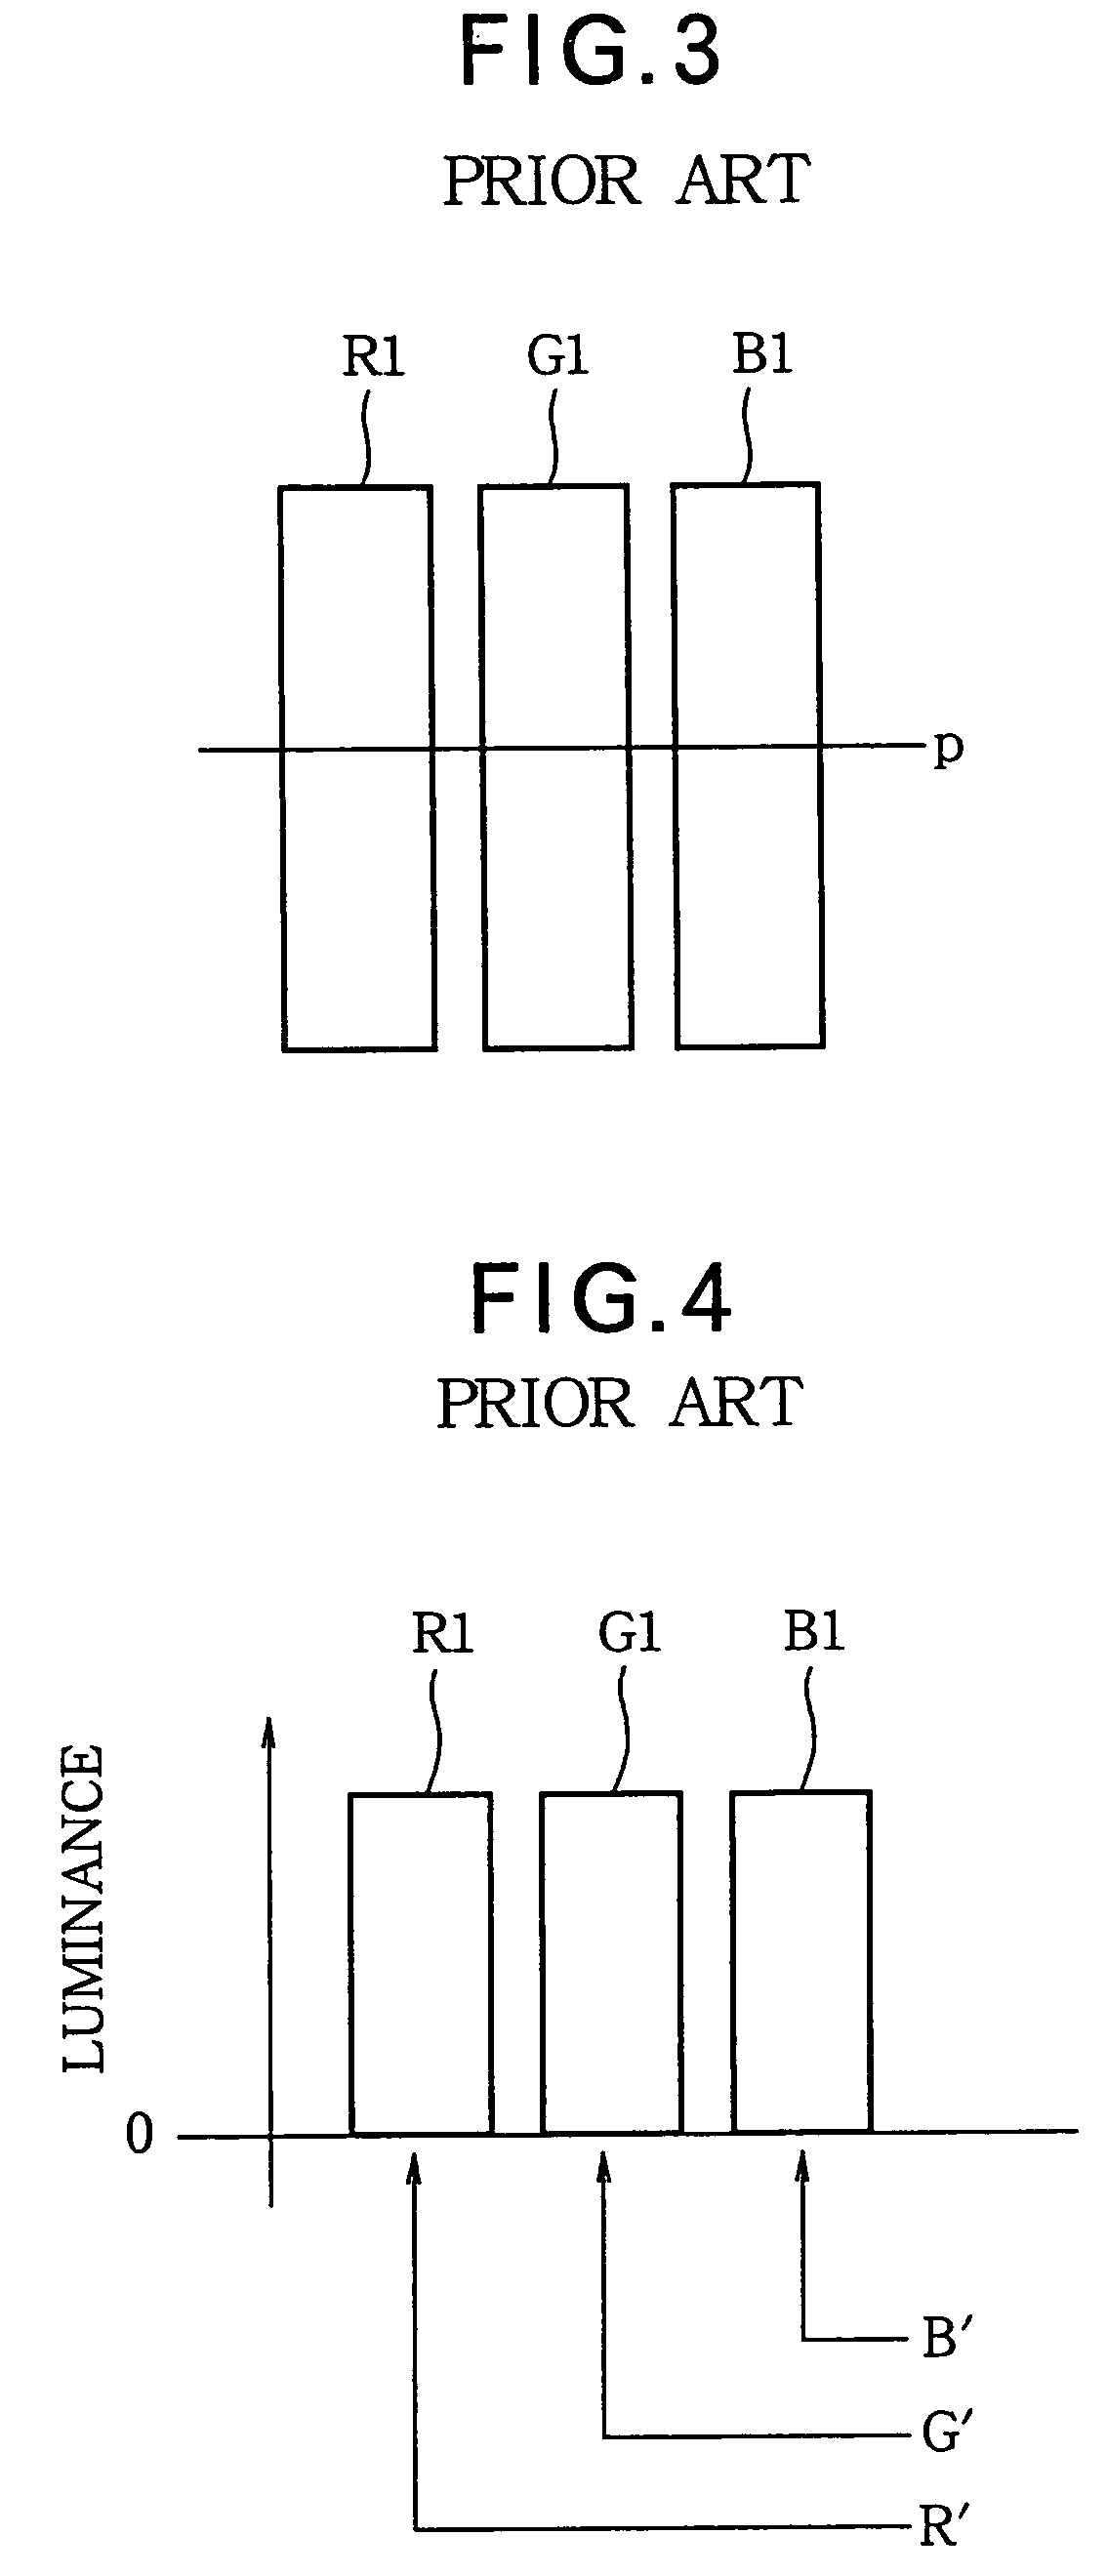 Image display device employing selective or asymmetrical smoothing